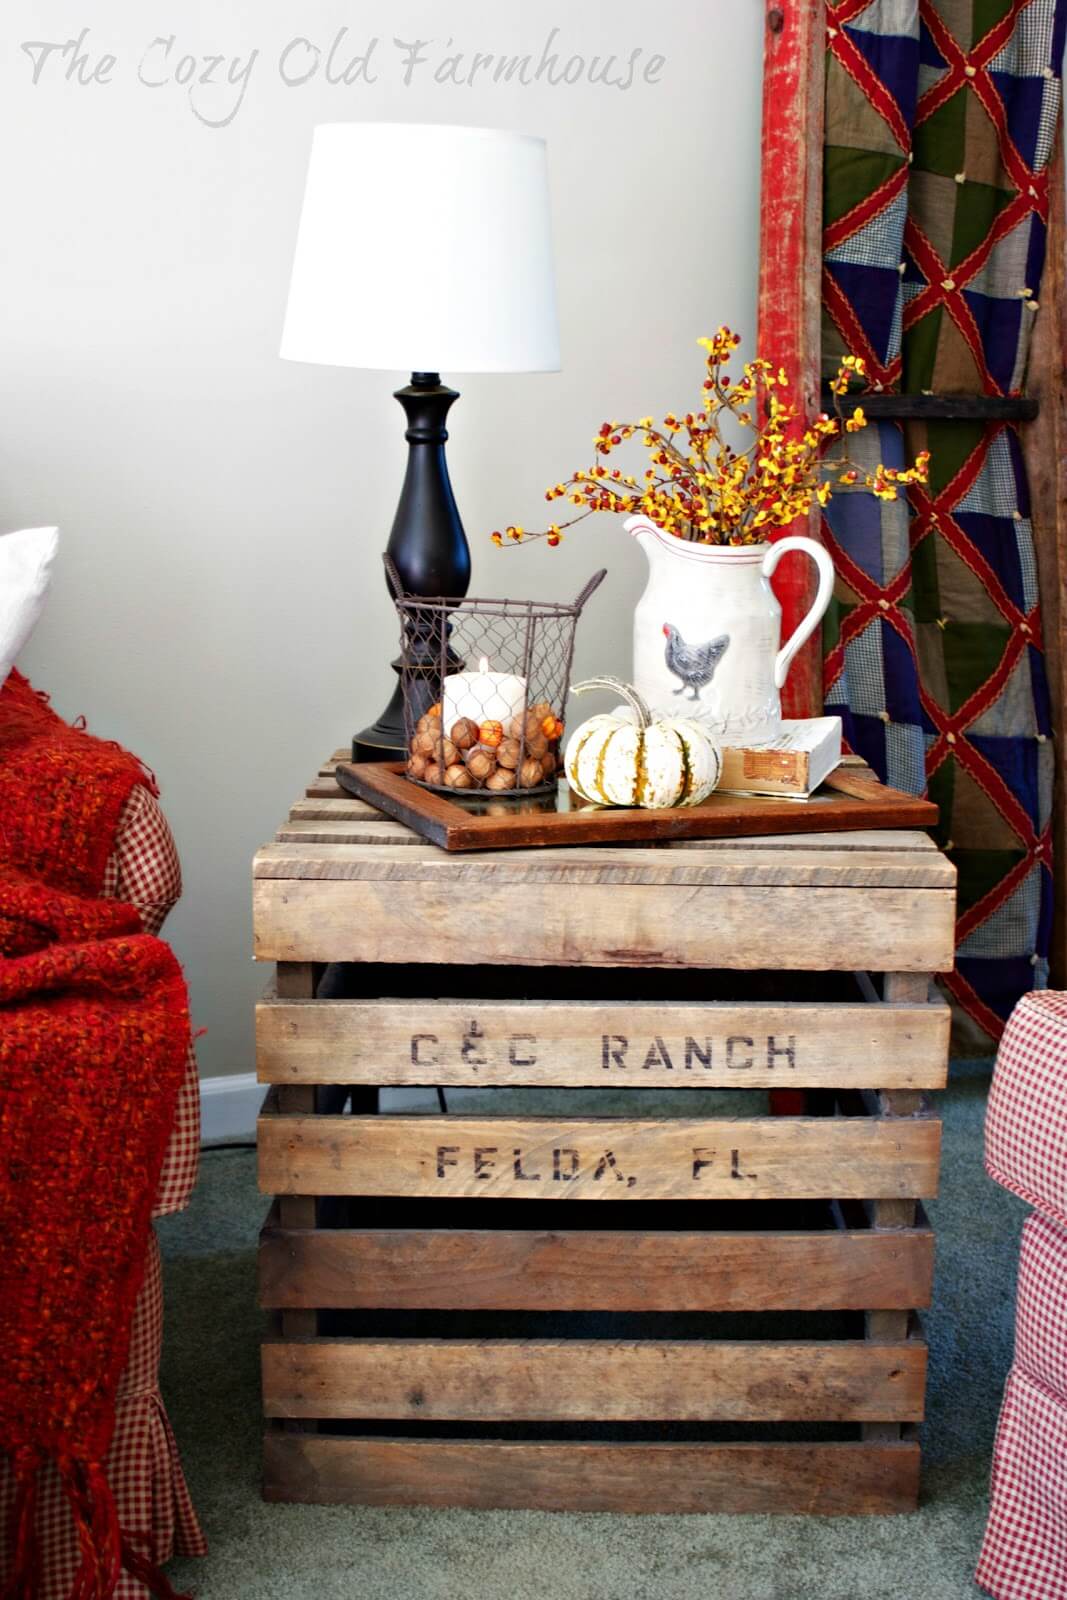 Upend a Crate for a Perfect Fall Display End Table